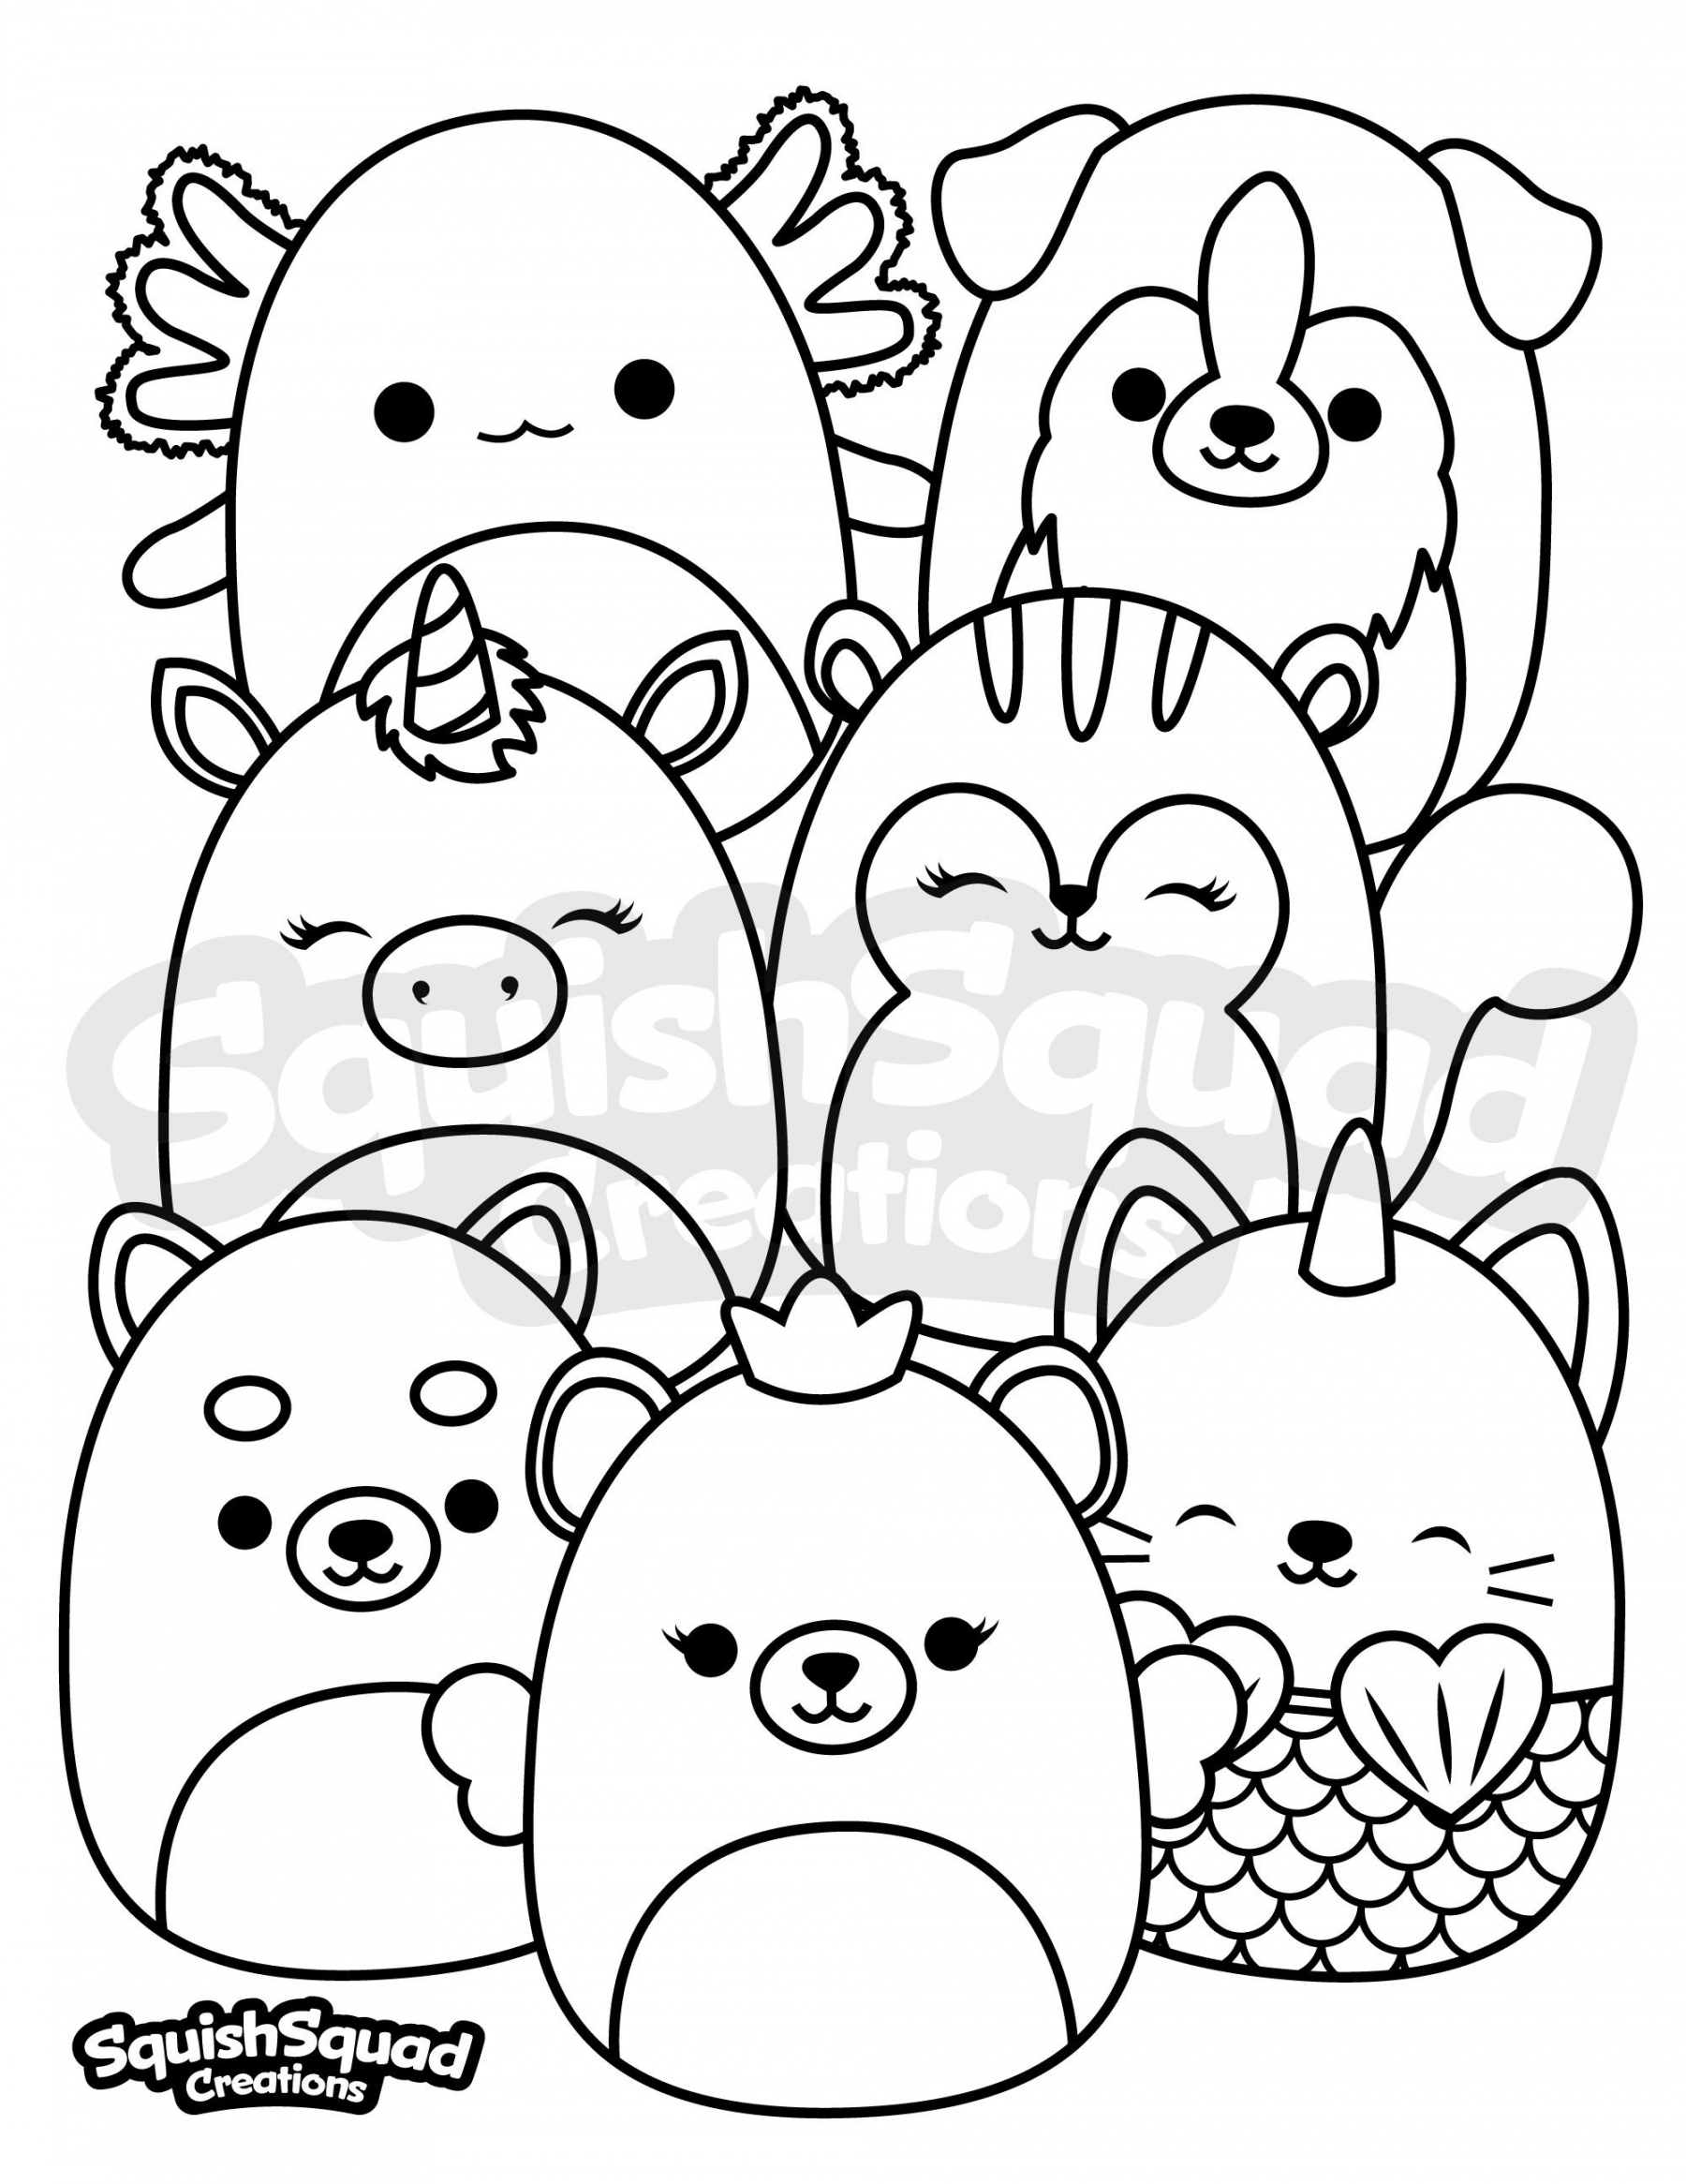 Squishmallow Coloring Page, Printable Squishmallow Coloring Page,  Squishmallow Downloadable Coloring Sheet, Coloring Page For Kids - FREE Printables - Free Printable Squishmallow Coloring Pages